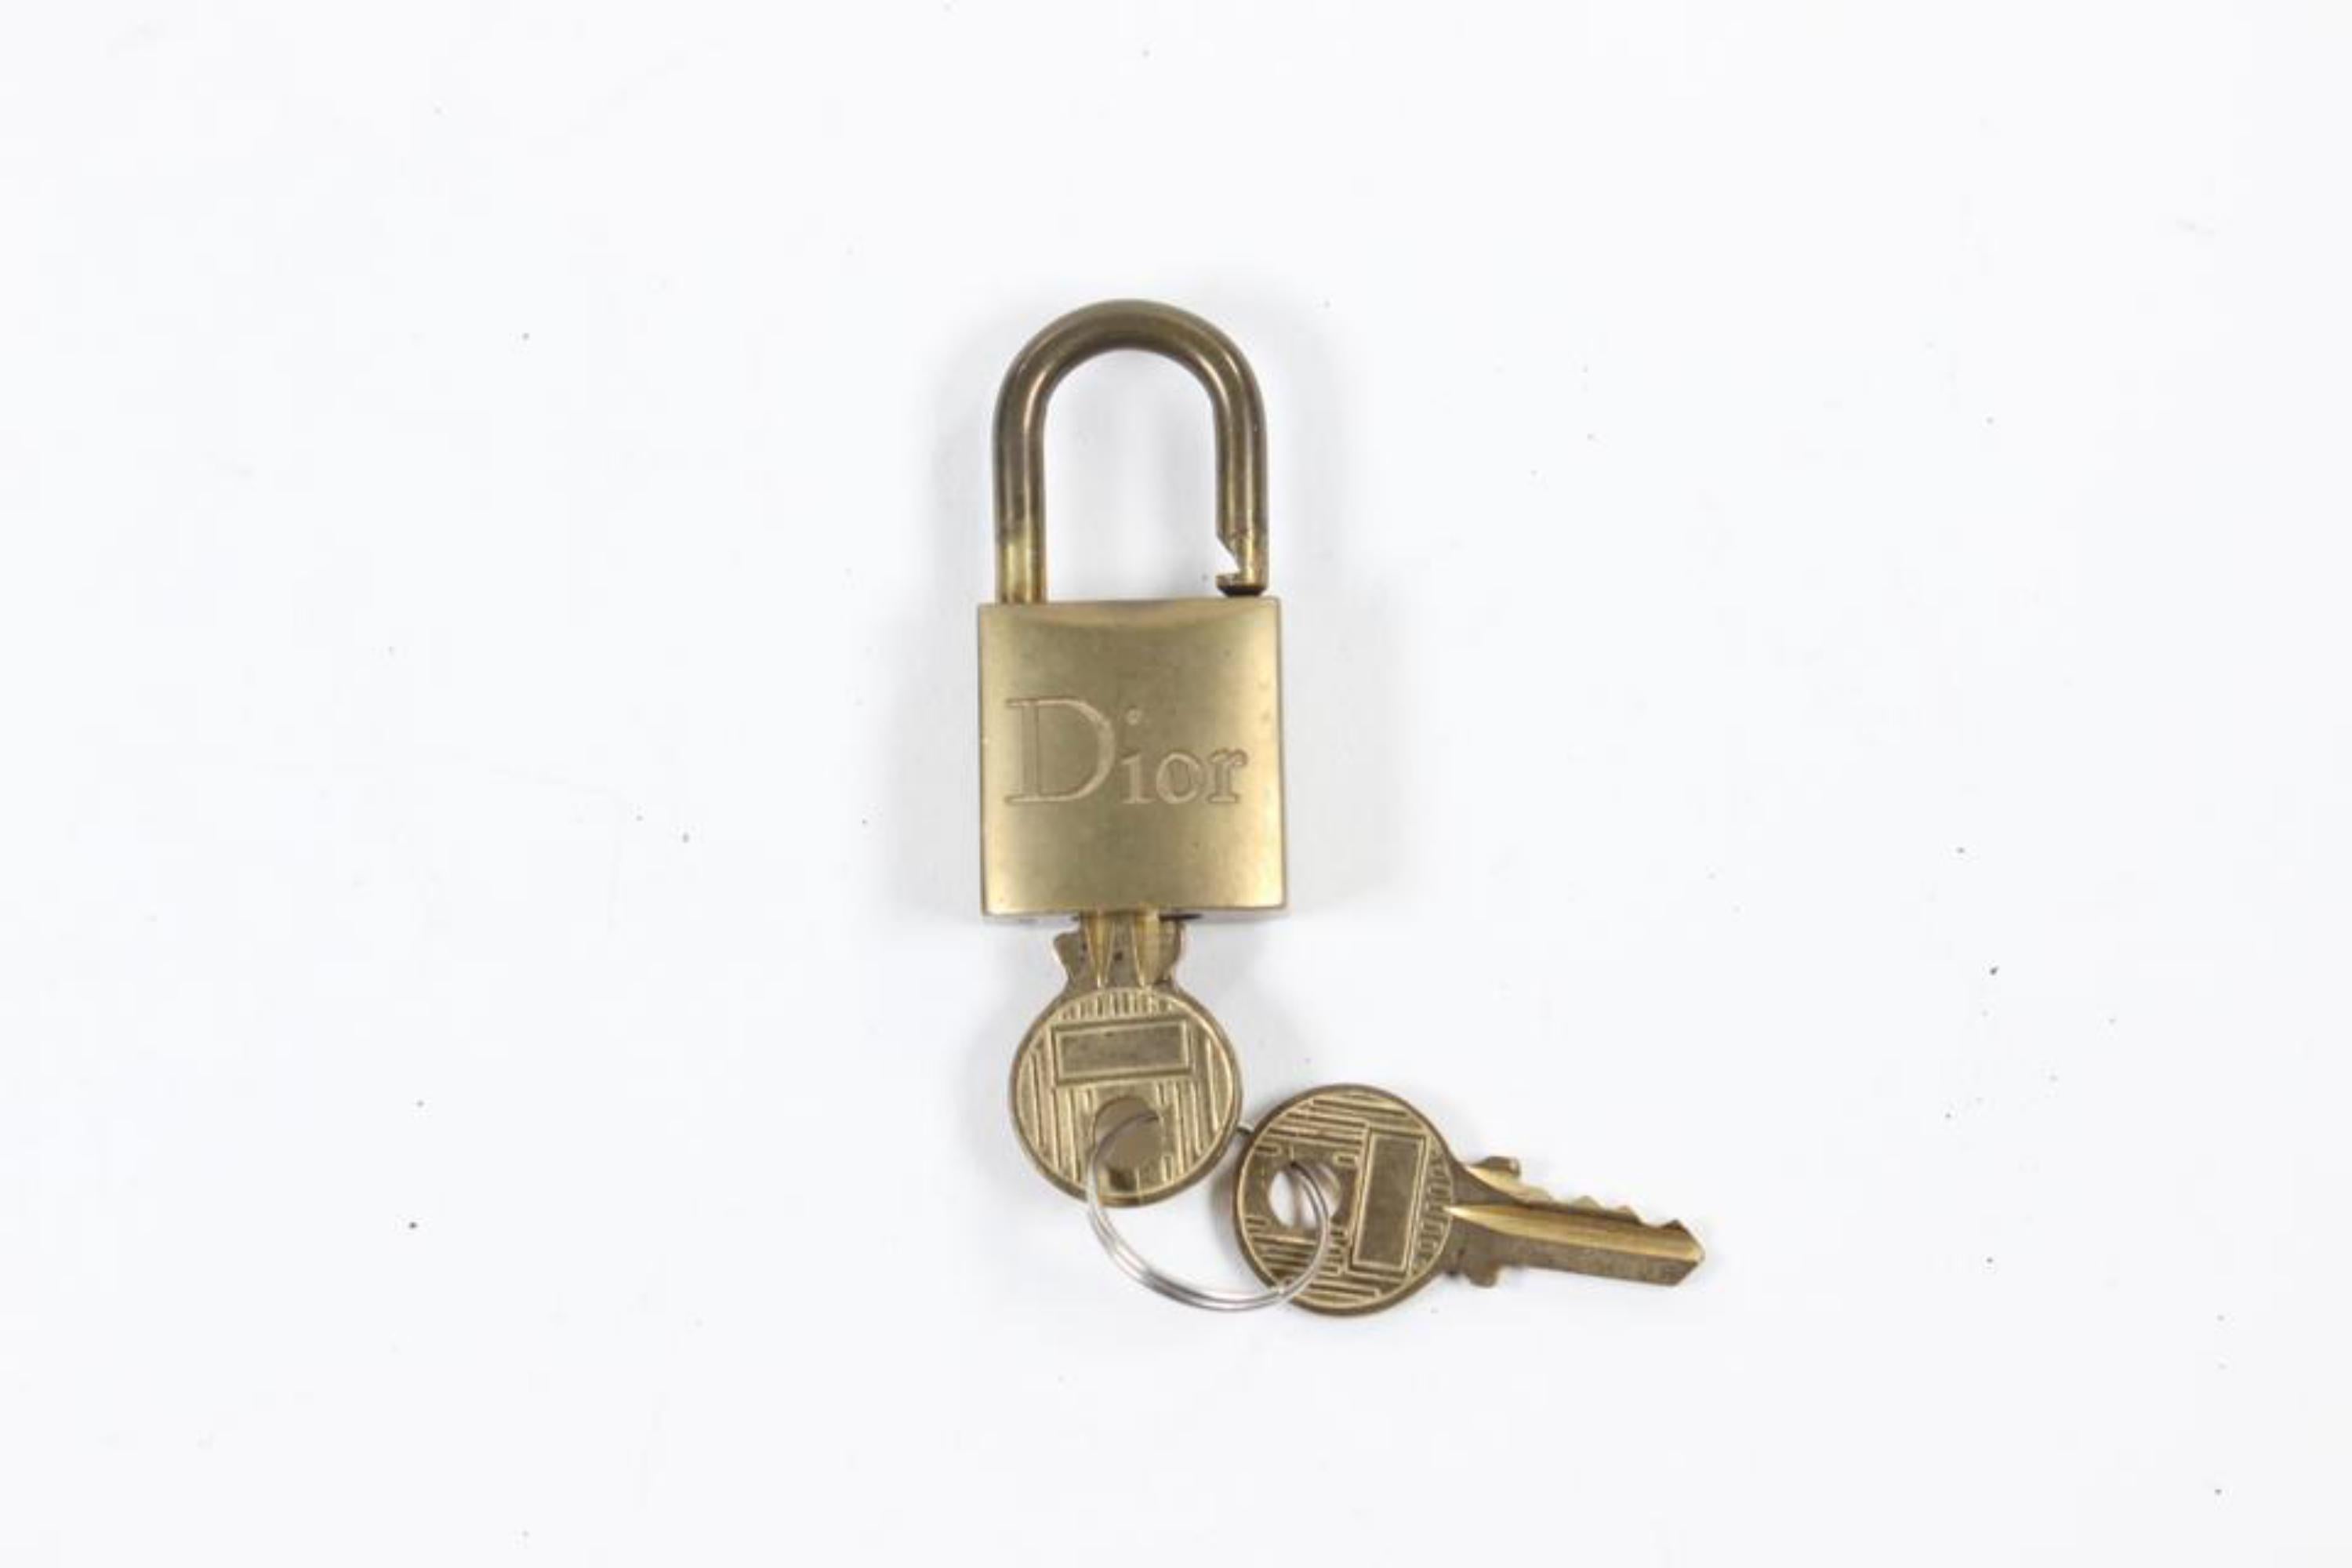 Dior Brass Logo Padlock and Key Bag Charm Lock Set 3DR1104 In Good Condition For Sale In Dix hills, NY